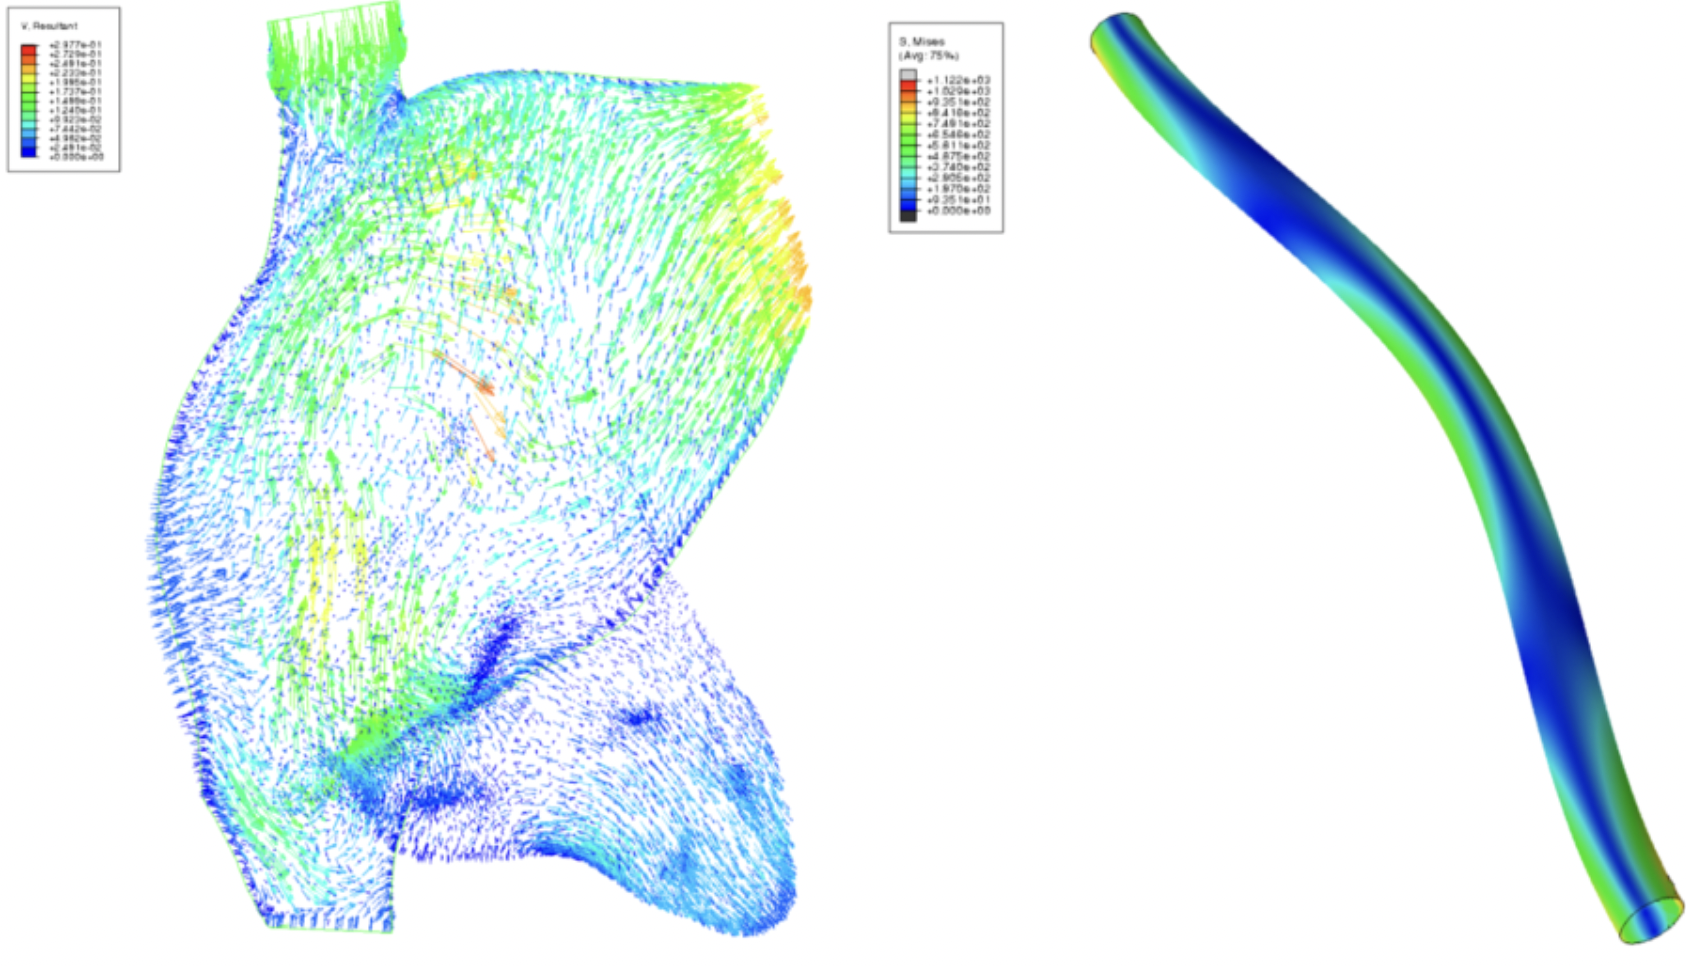 Teaser image for Podium Presentation: Fluid-Structure Interaction Simulation of Cardiac Leads in the Heart: Developing a Computational Model for use in Medical Device Design